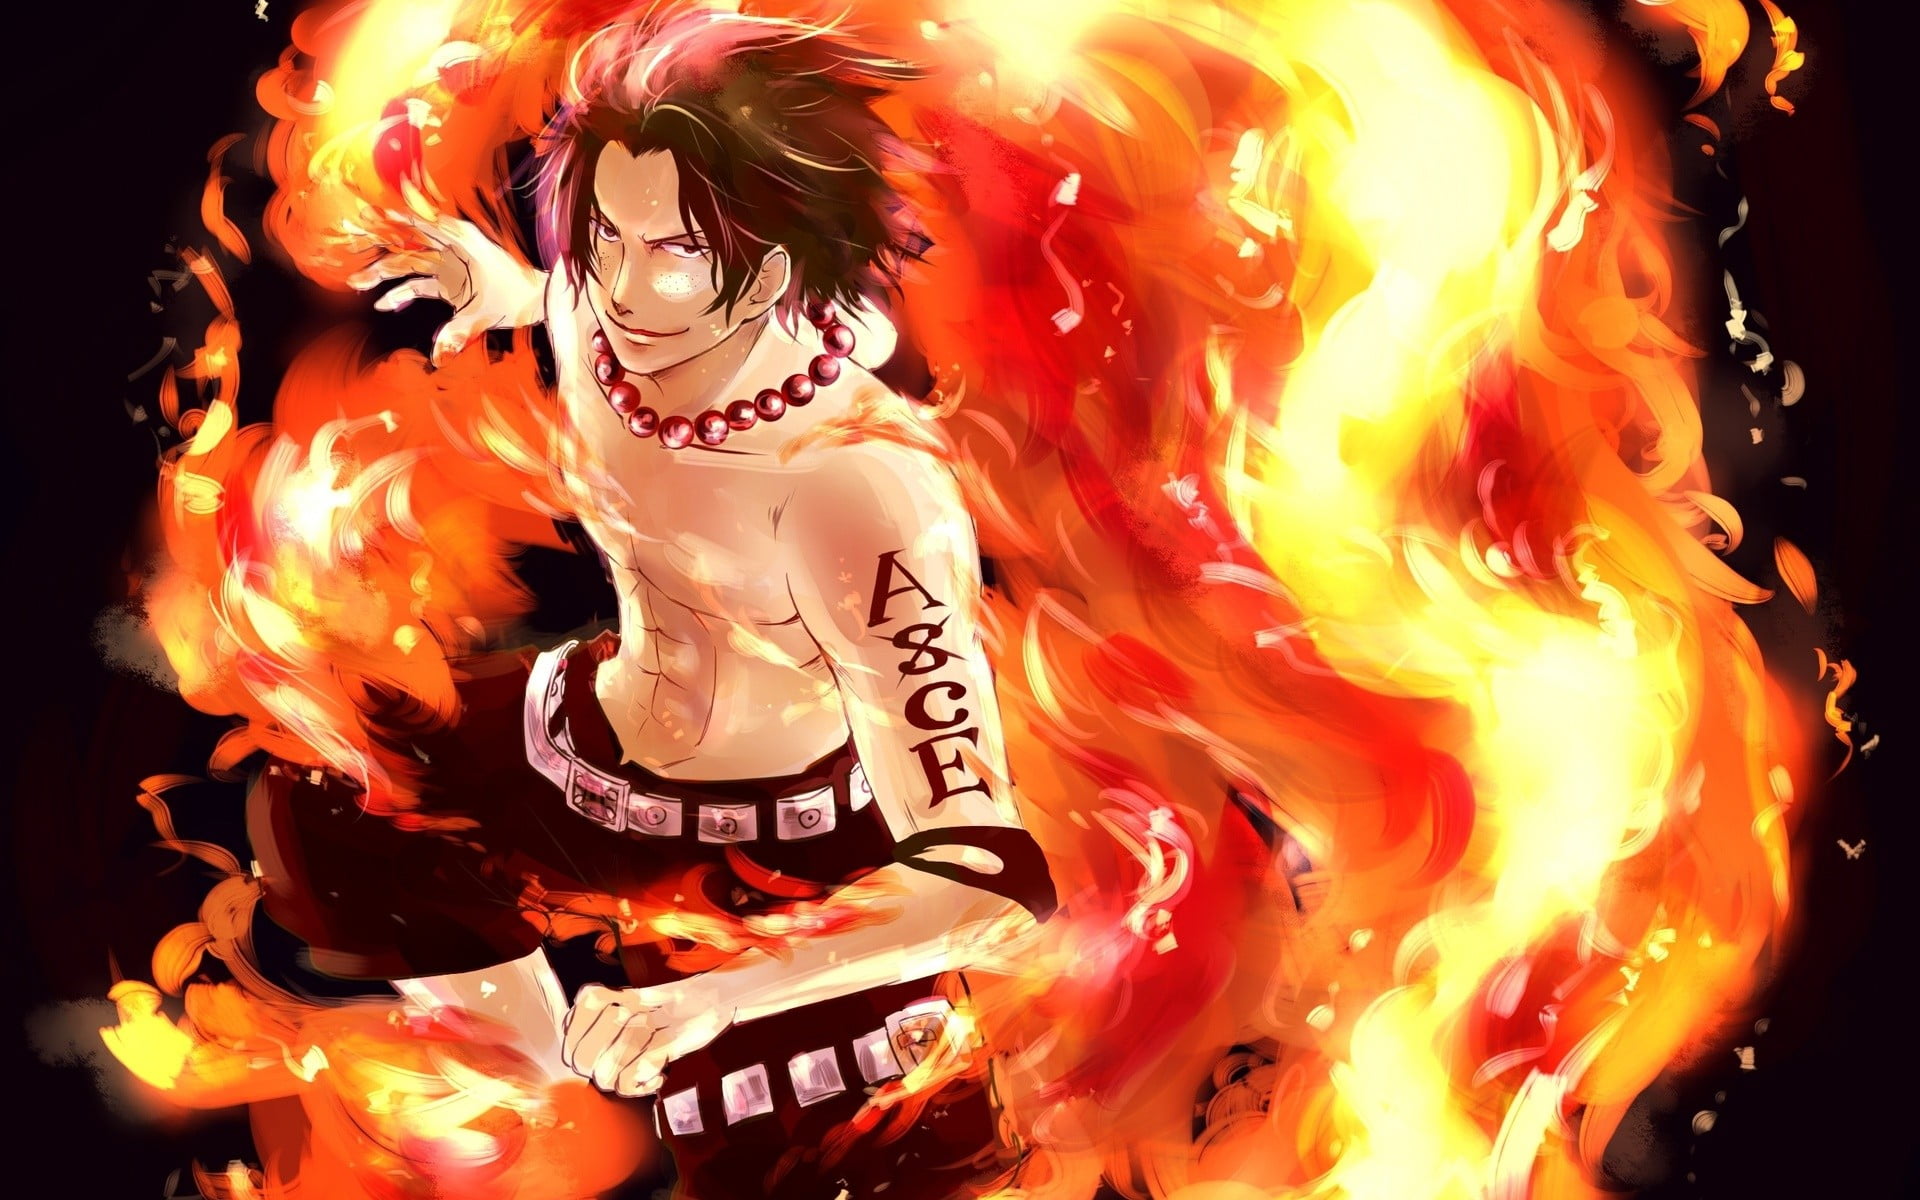 HD wallpaper anime character wallpaper One Piece Portgas D Ace anime  boys  Wallpaper Flare